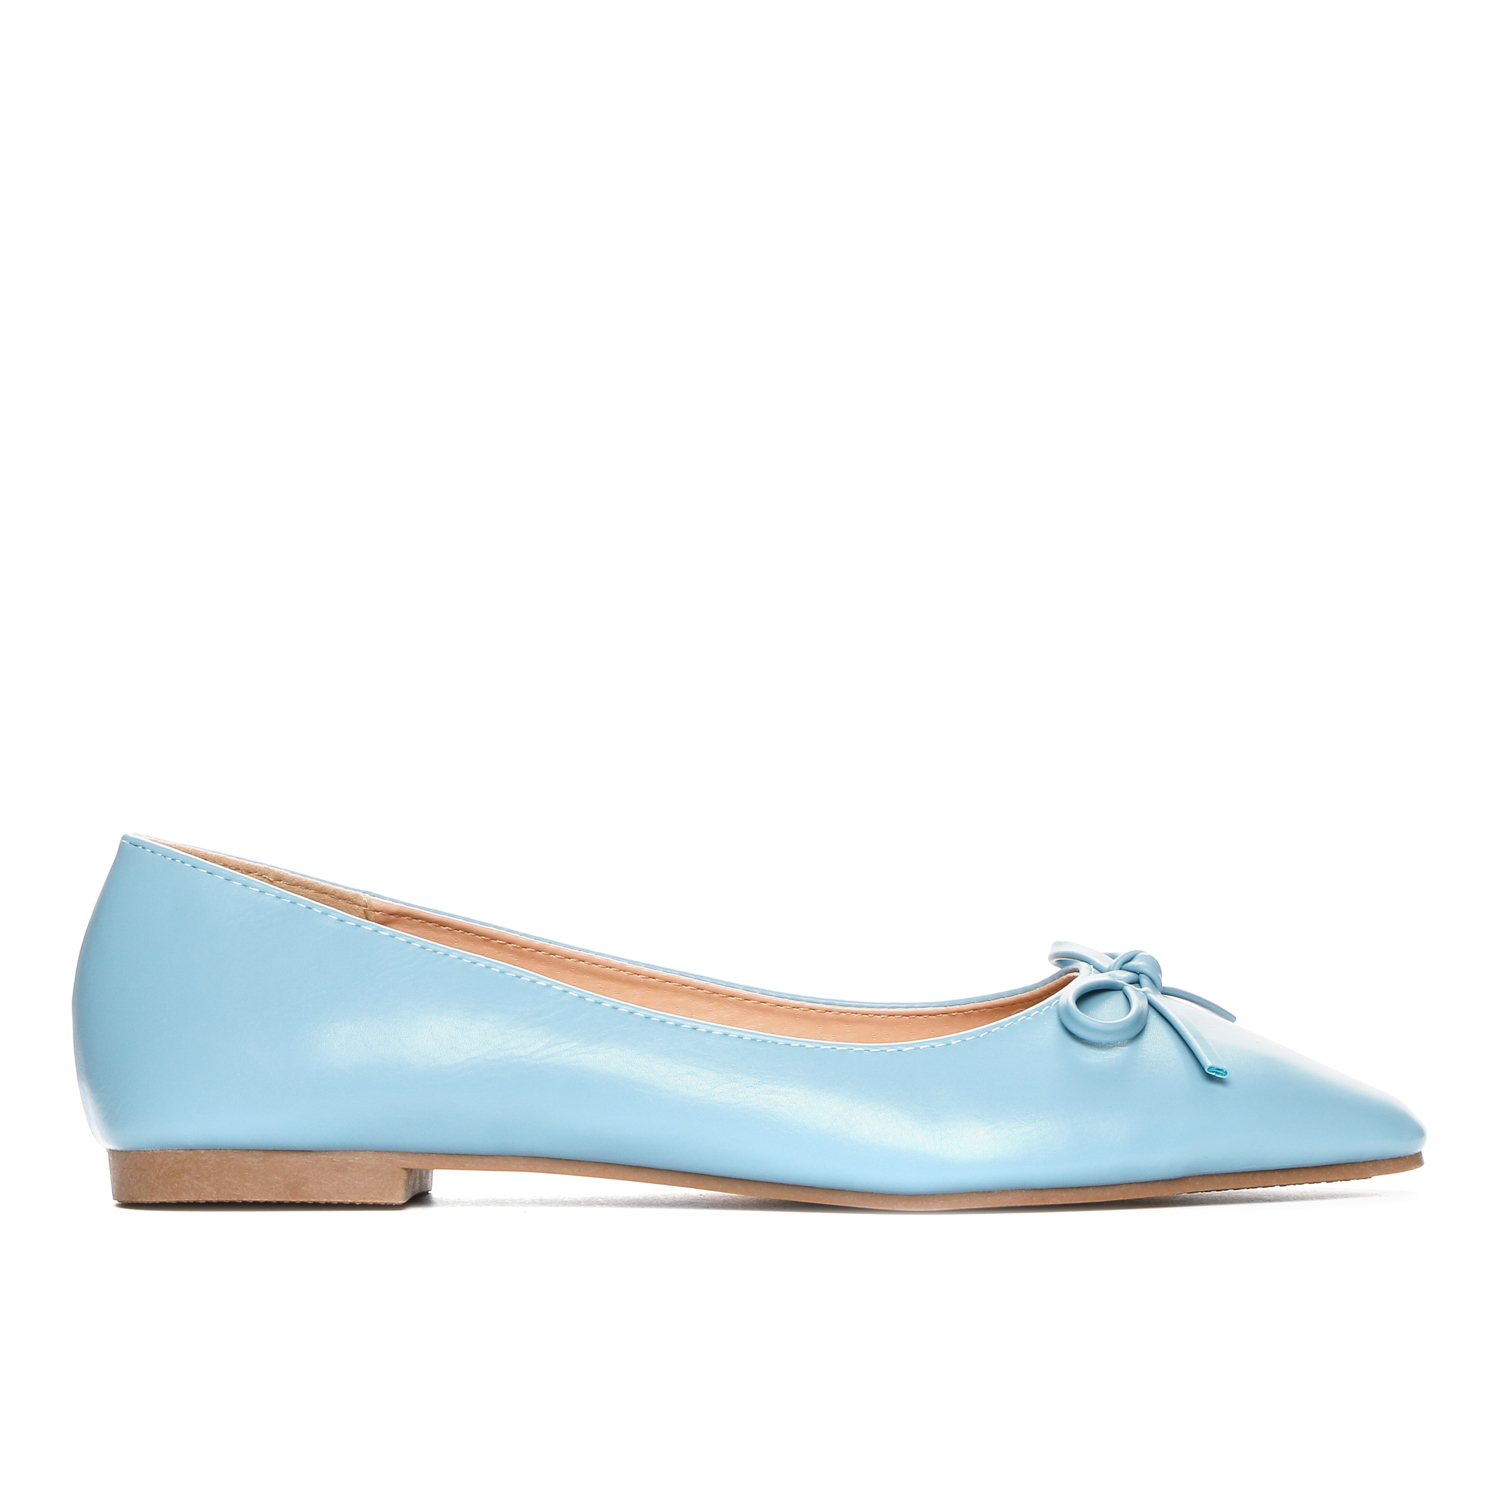 light blue pointed toe flats